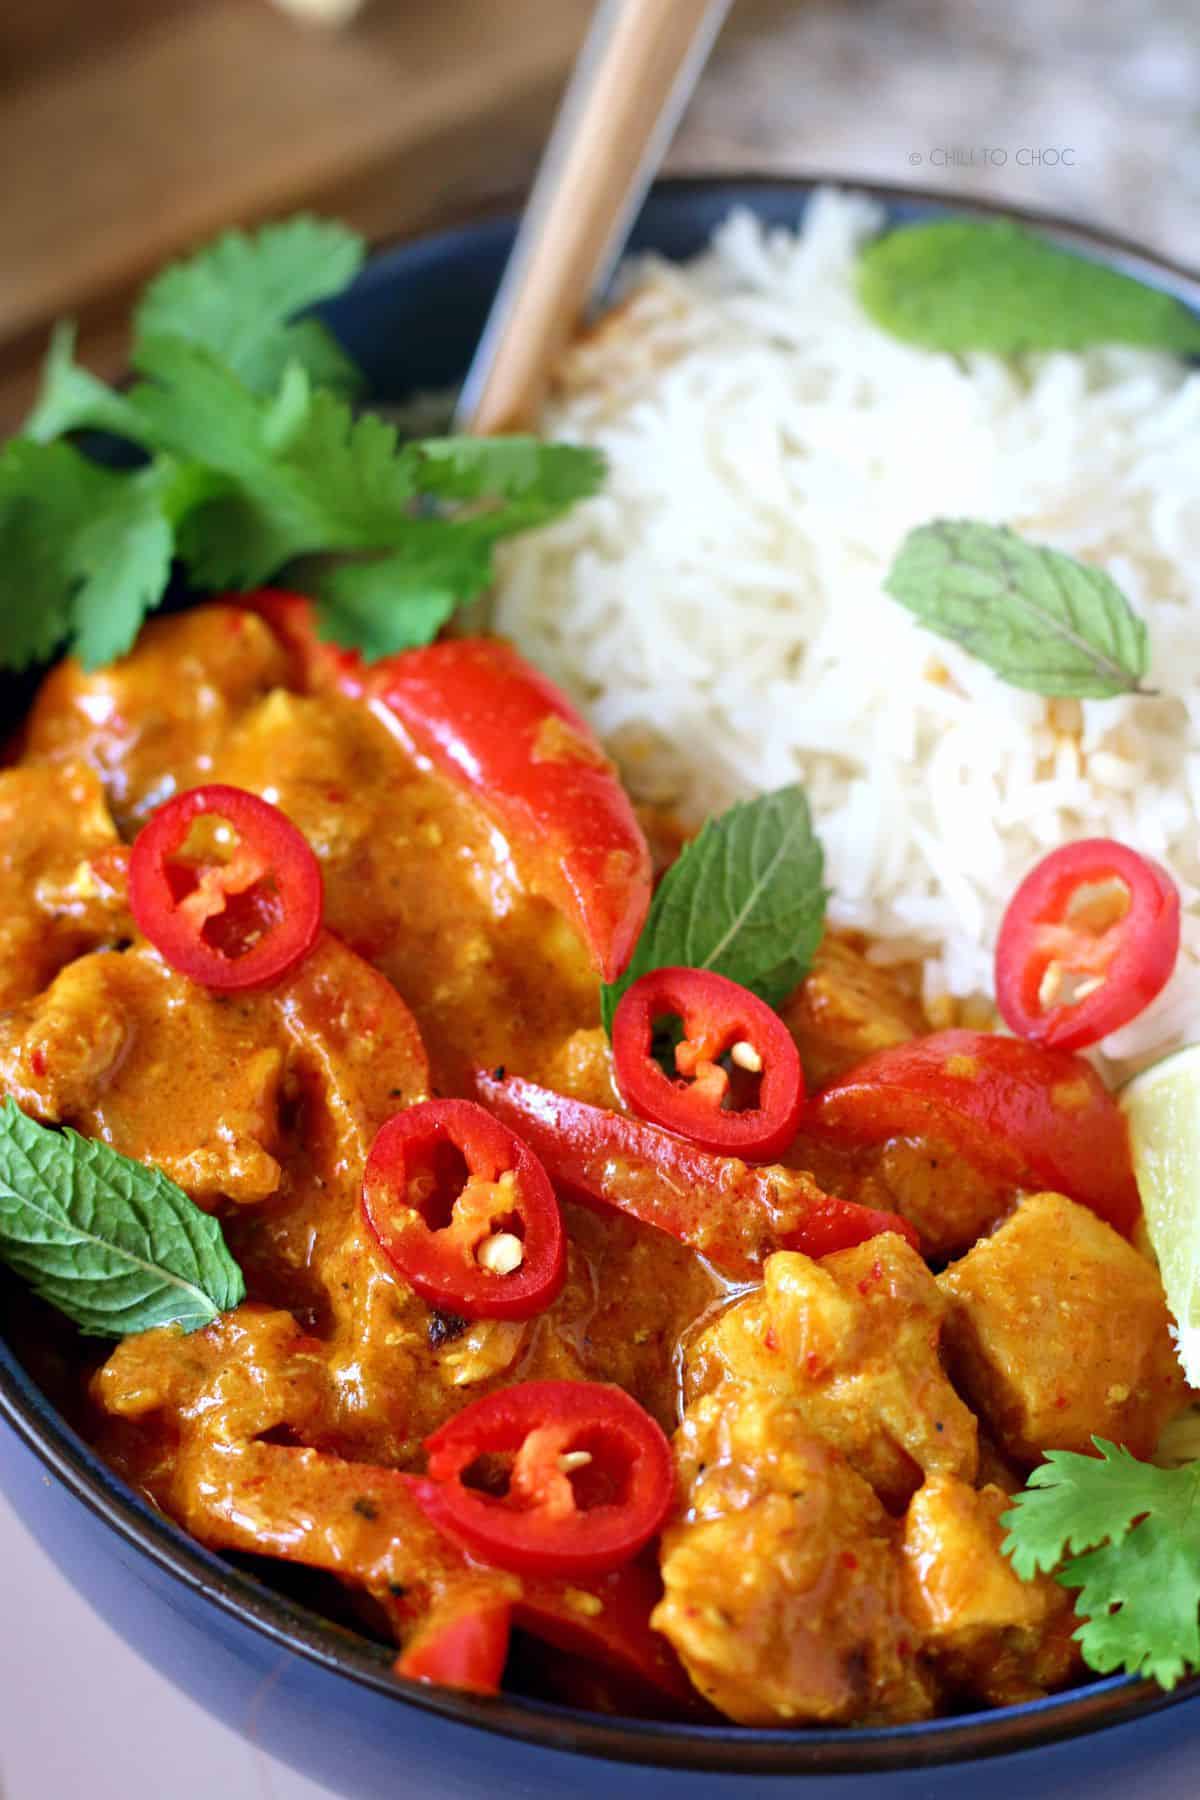 Closeup shot of Easy Thai Red Chicken Curry garnished with red chilies, coriander, mint with a side of boiled rice